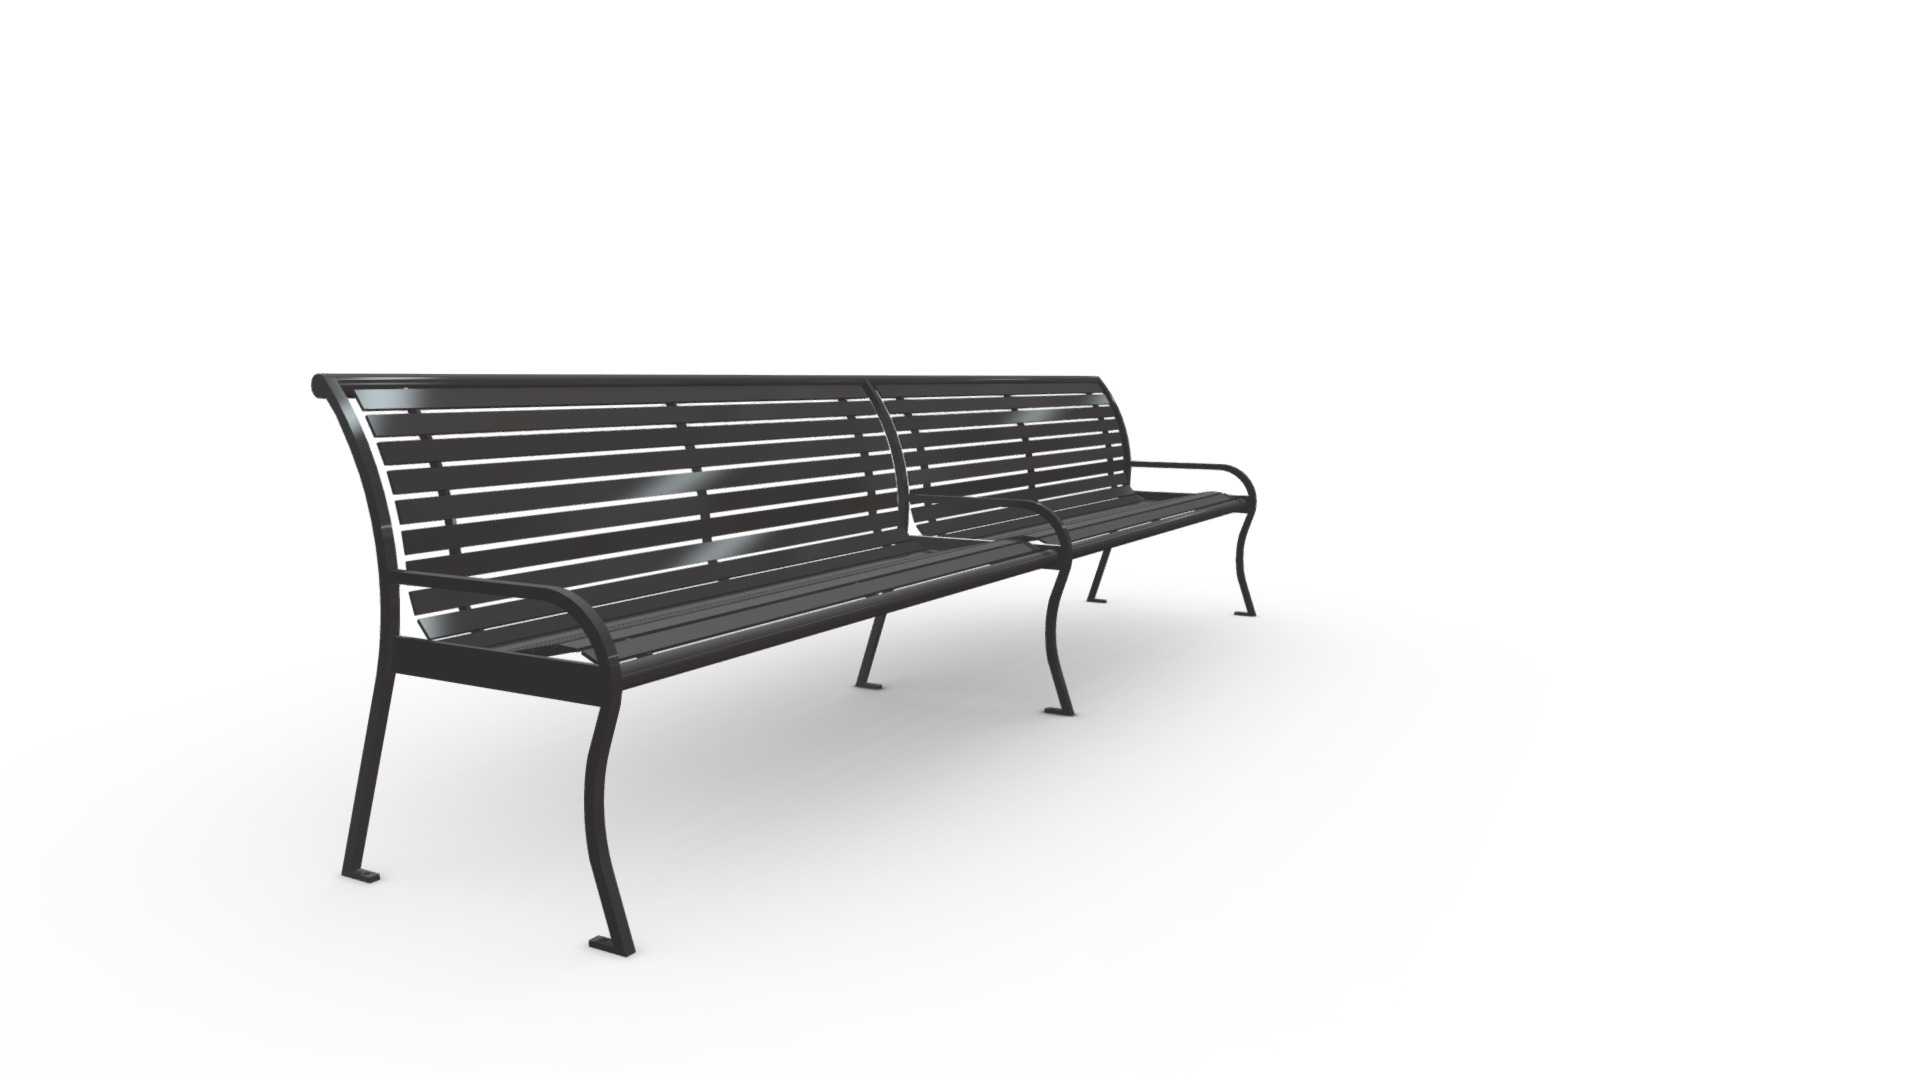 3D model SC-03.3,0 - This is a 3D model of the SC-03.3,0. The 3D model is about a black bench with a white background.